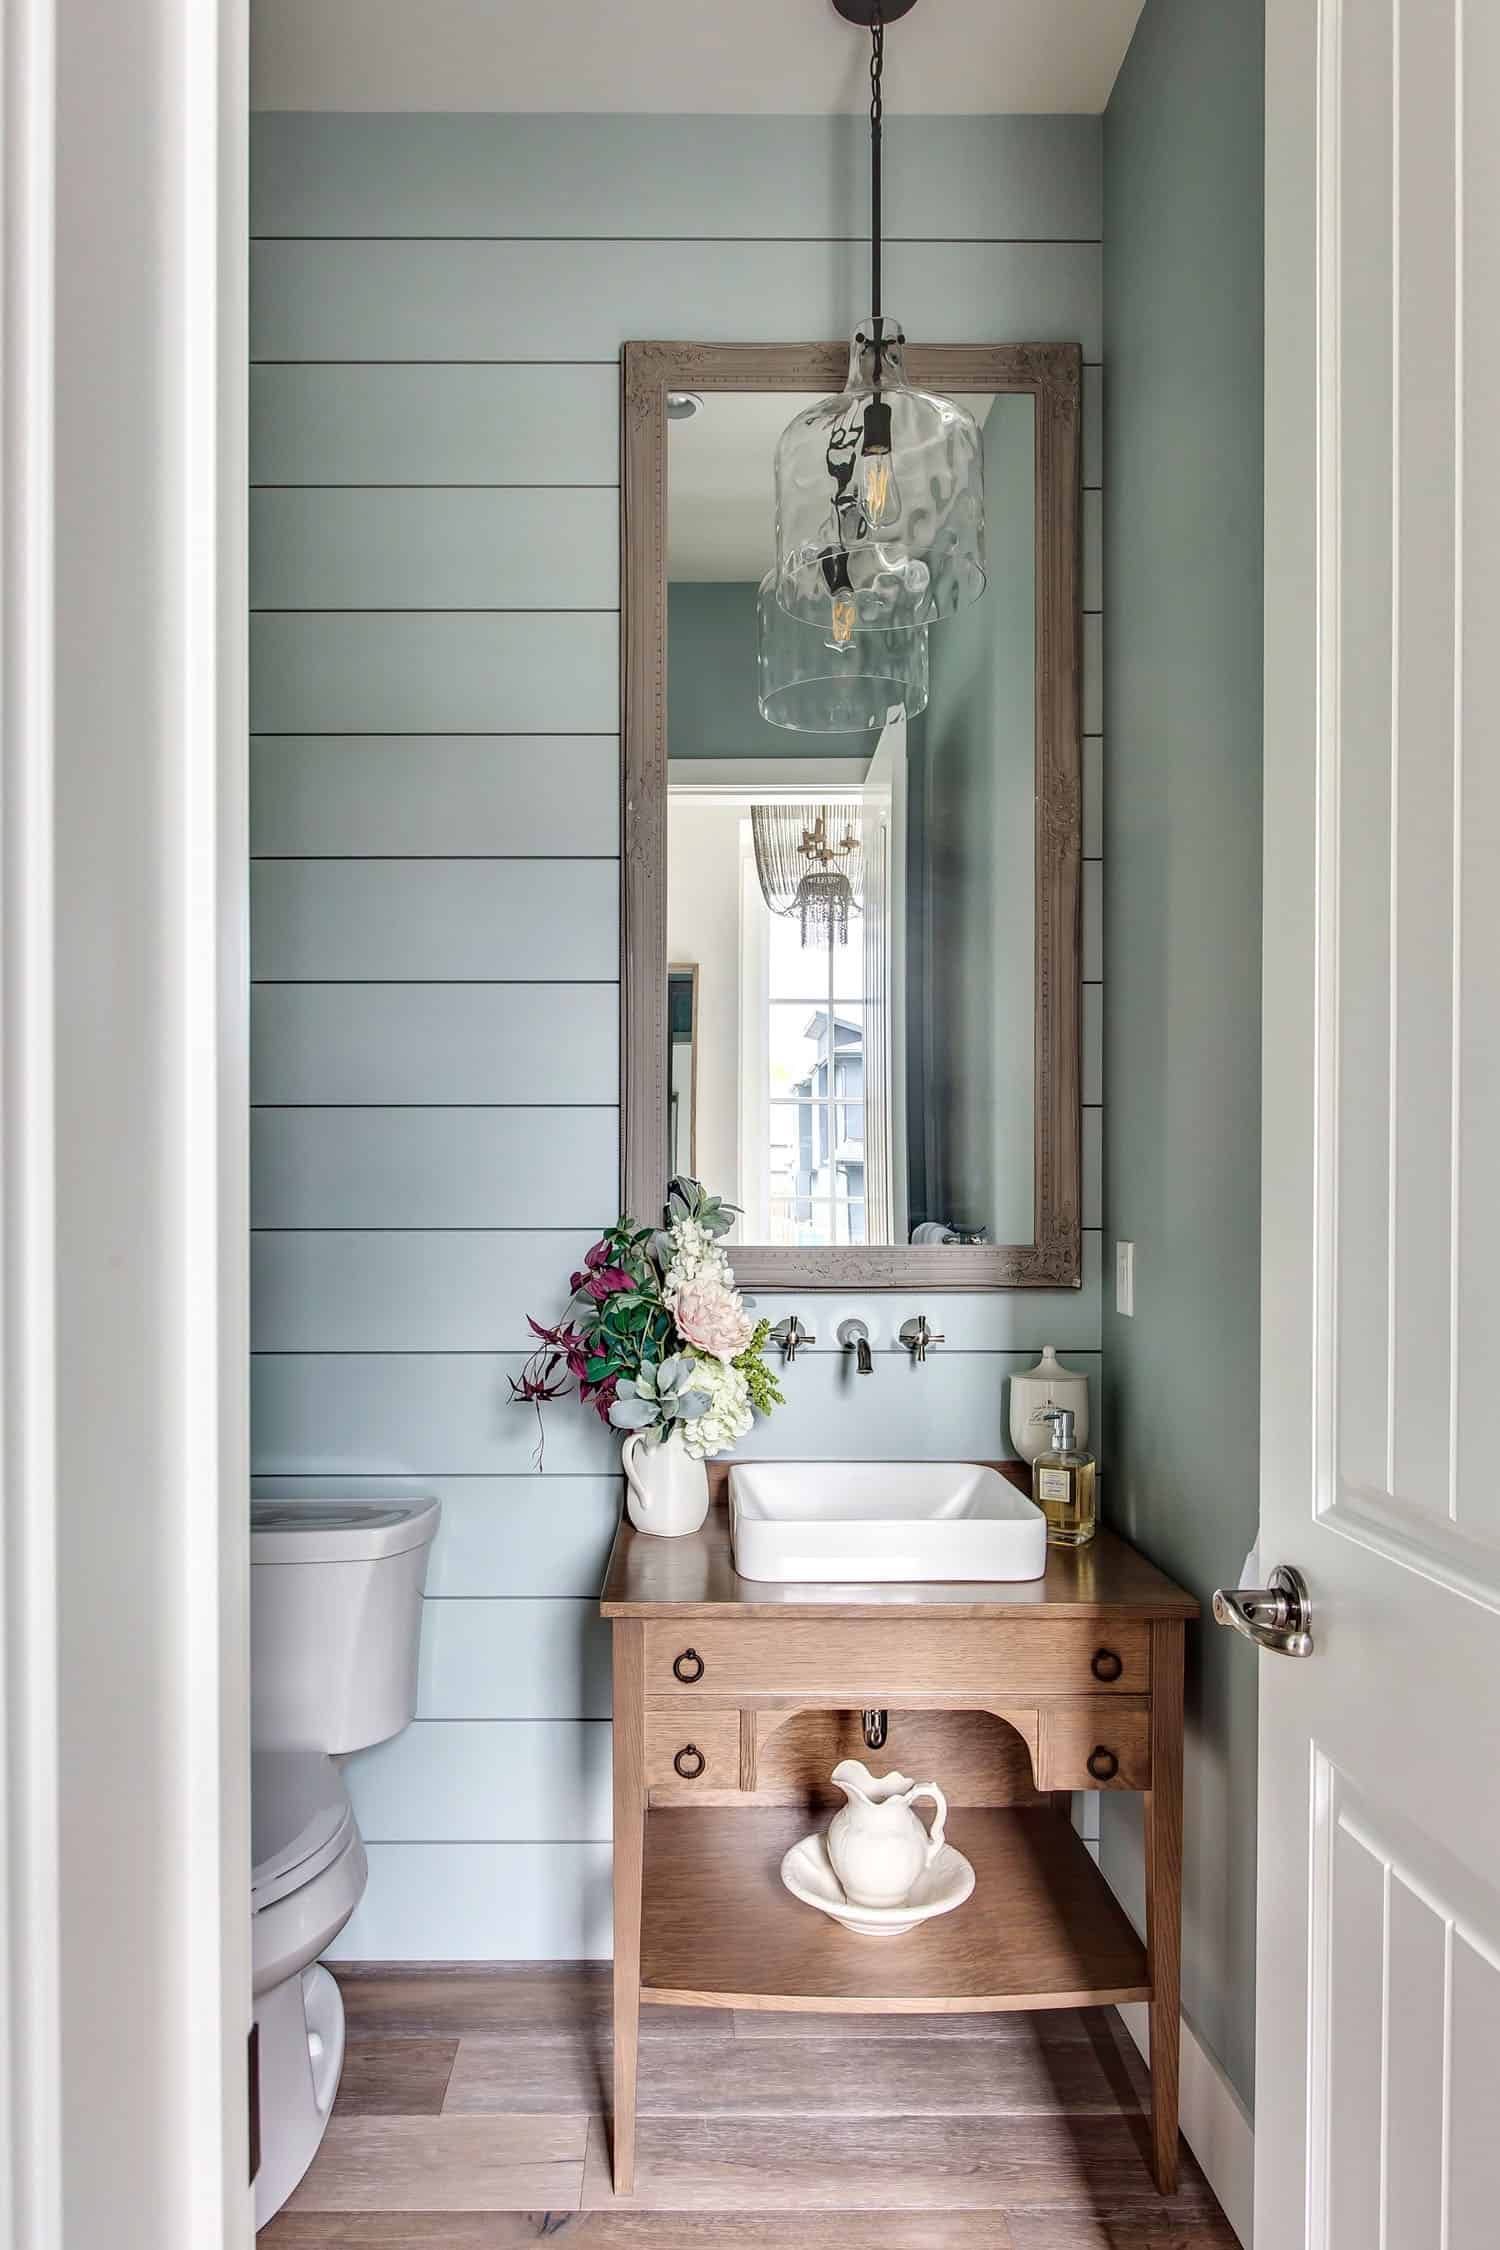 soft green shiplap walls, vintage cabinet turned into a bathroom vanity with a white raised sink on top.